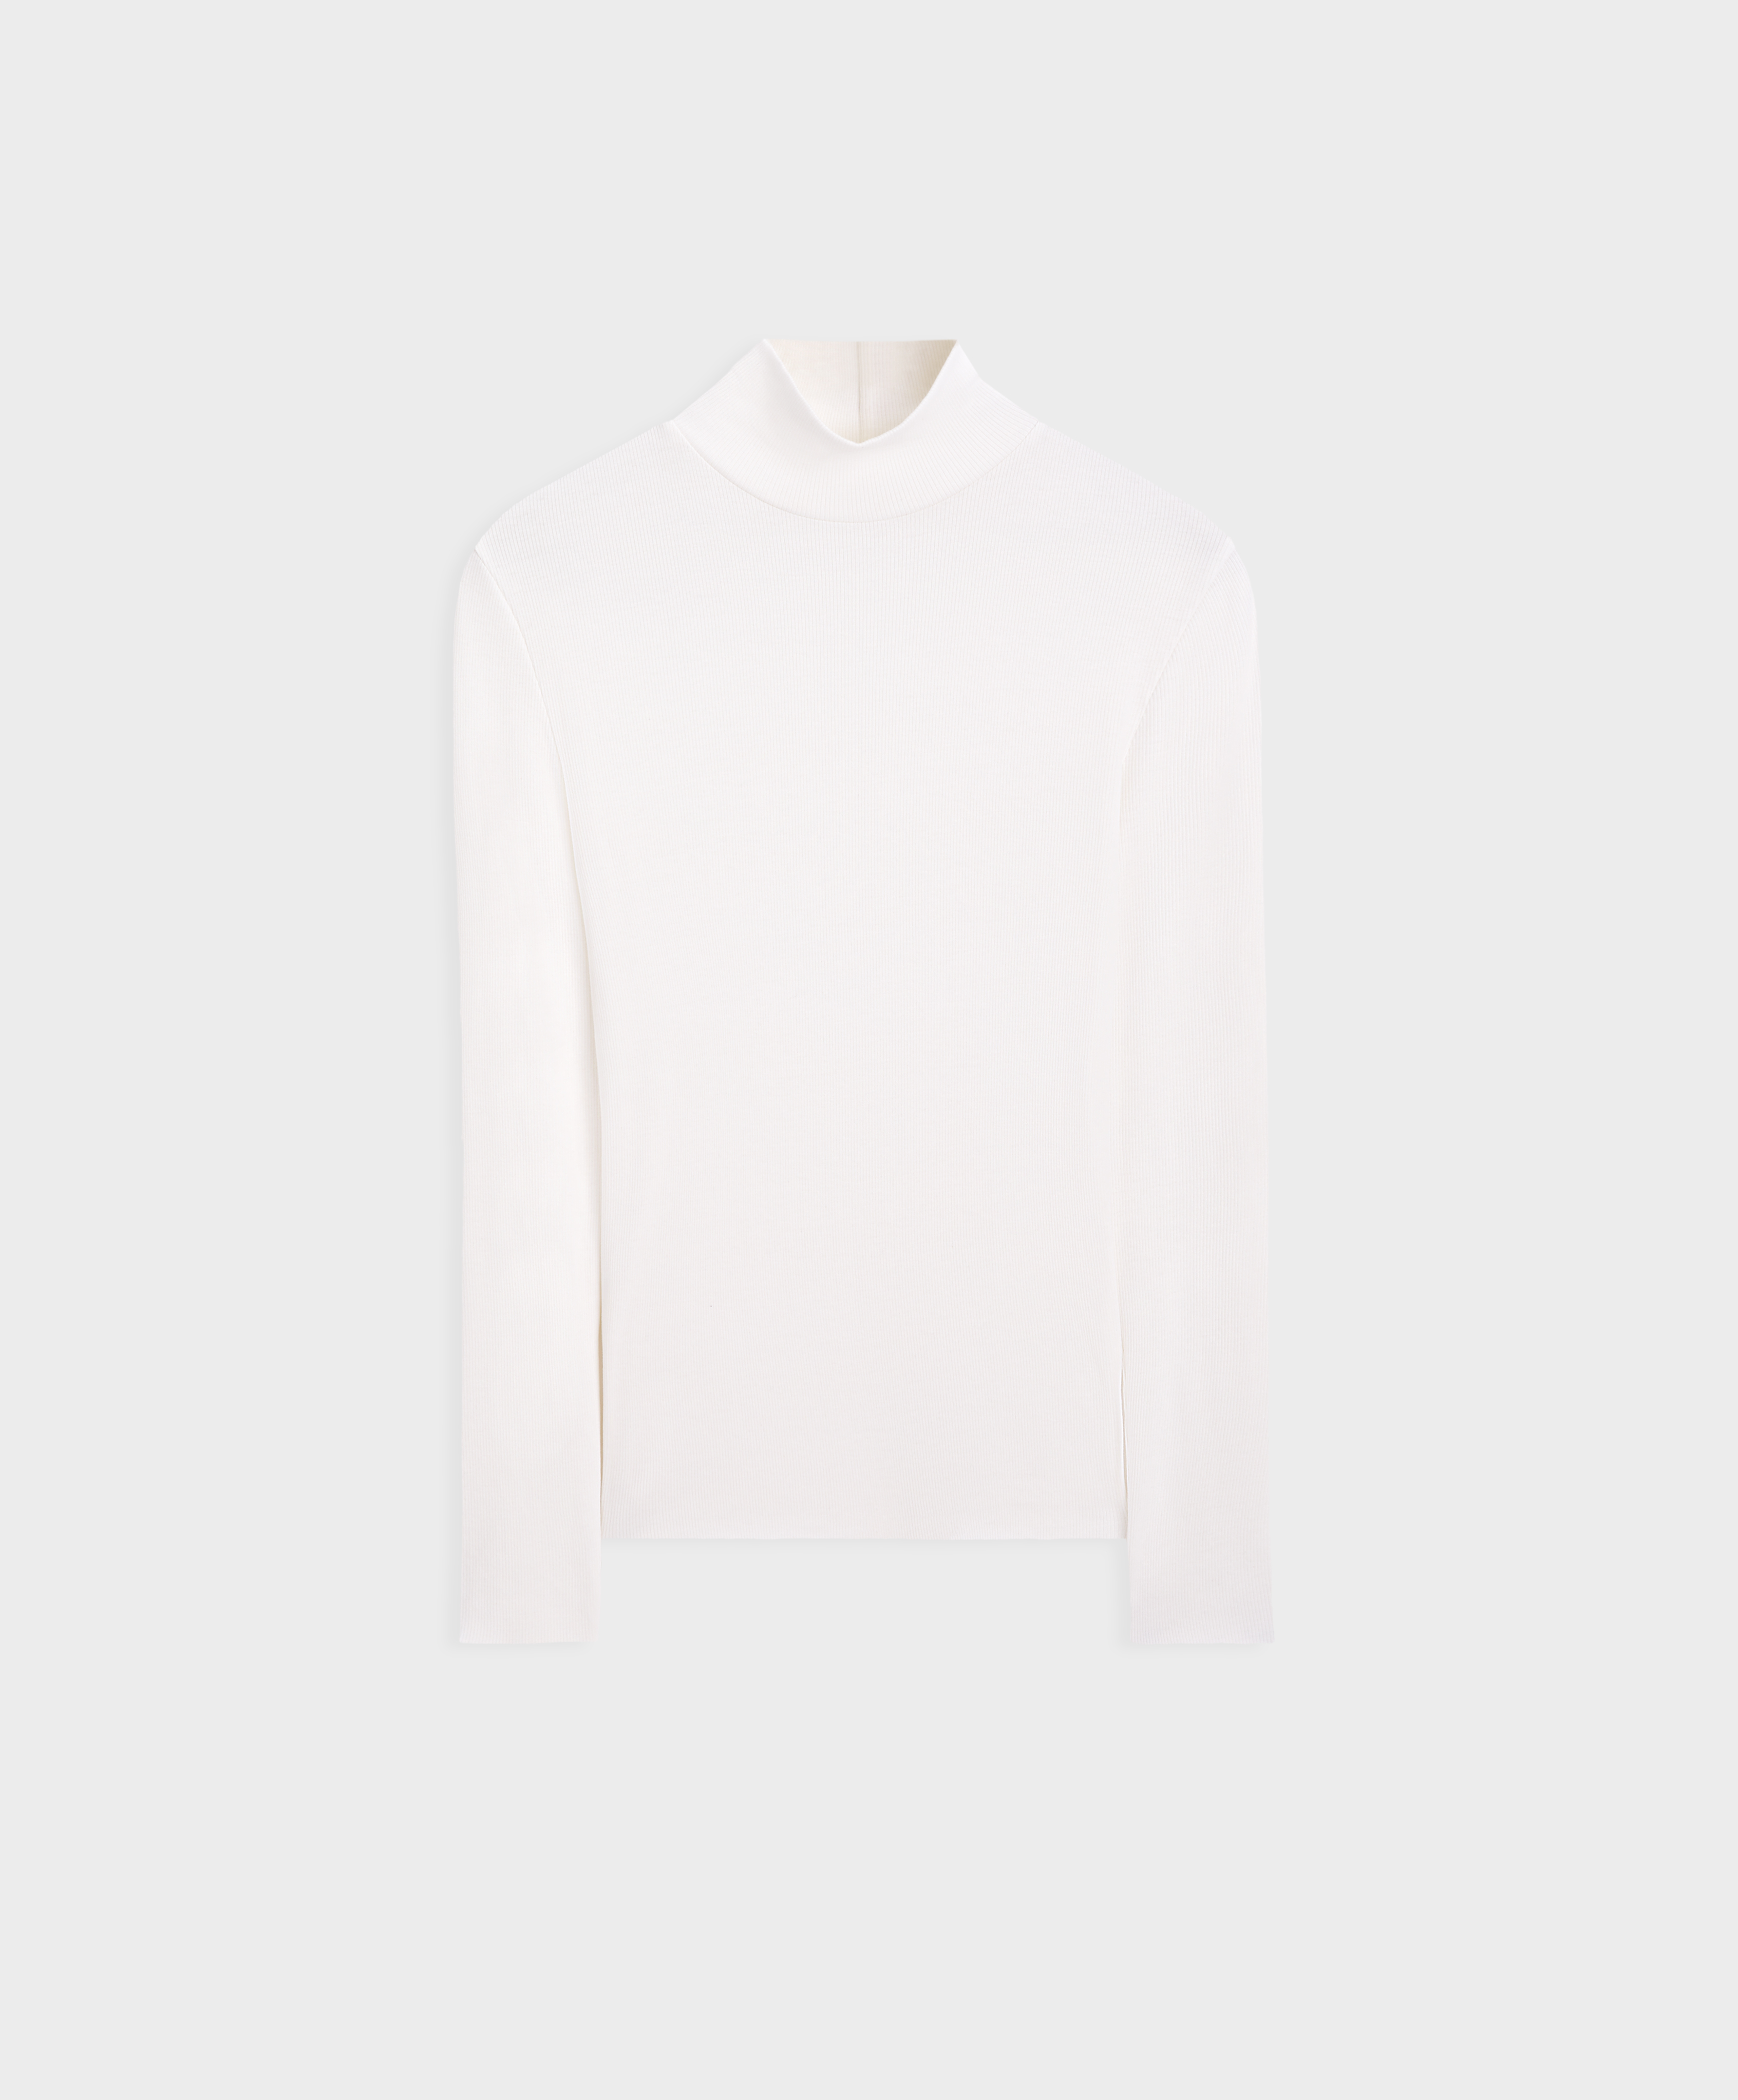 Modal cotton long-sleeved T-shirt with high neck